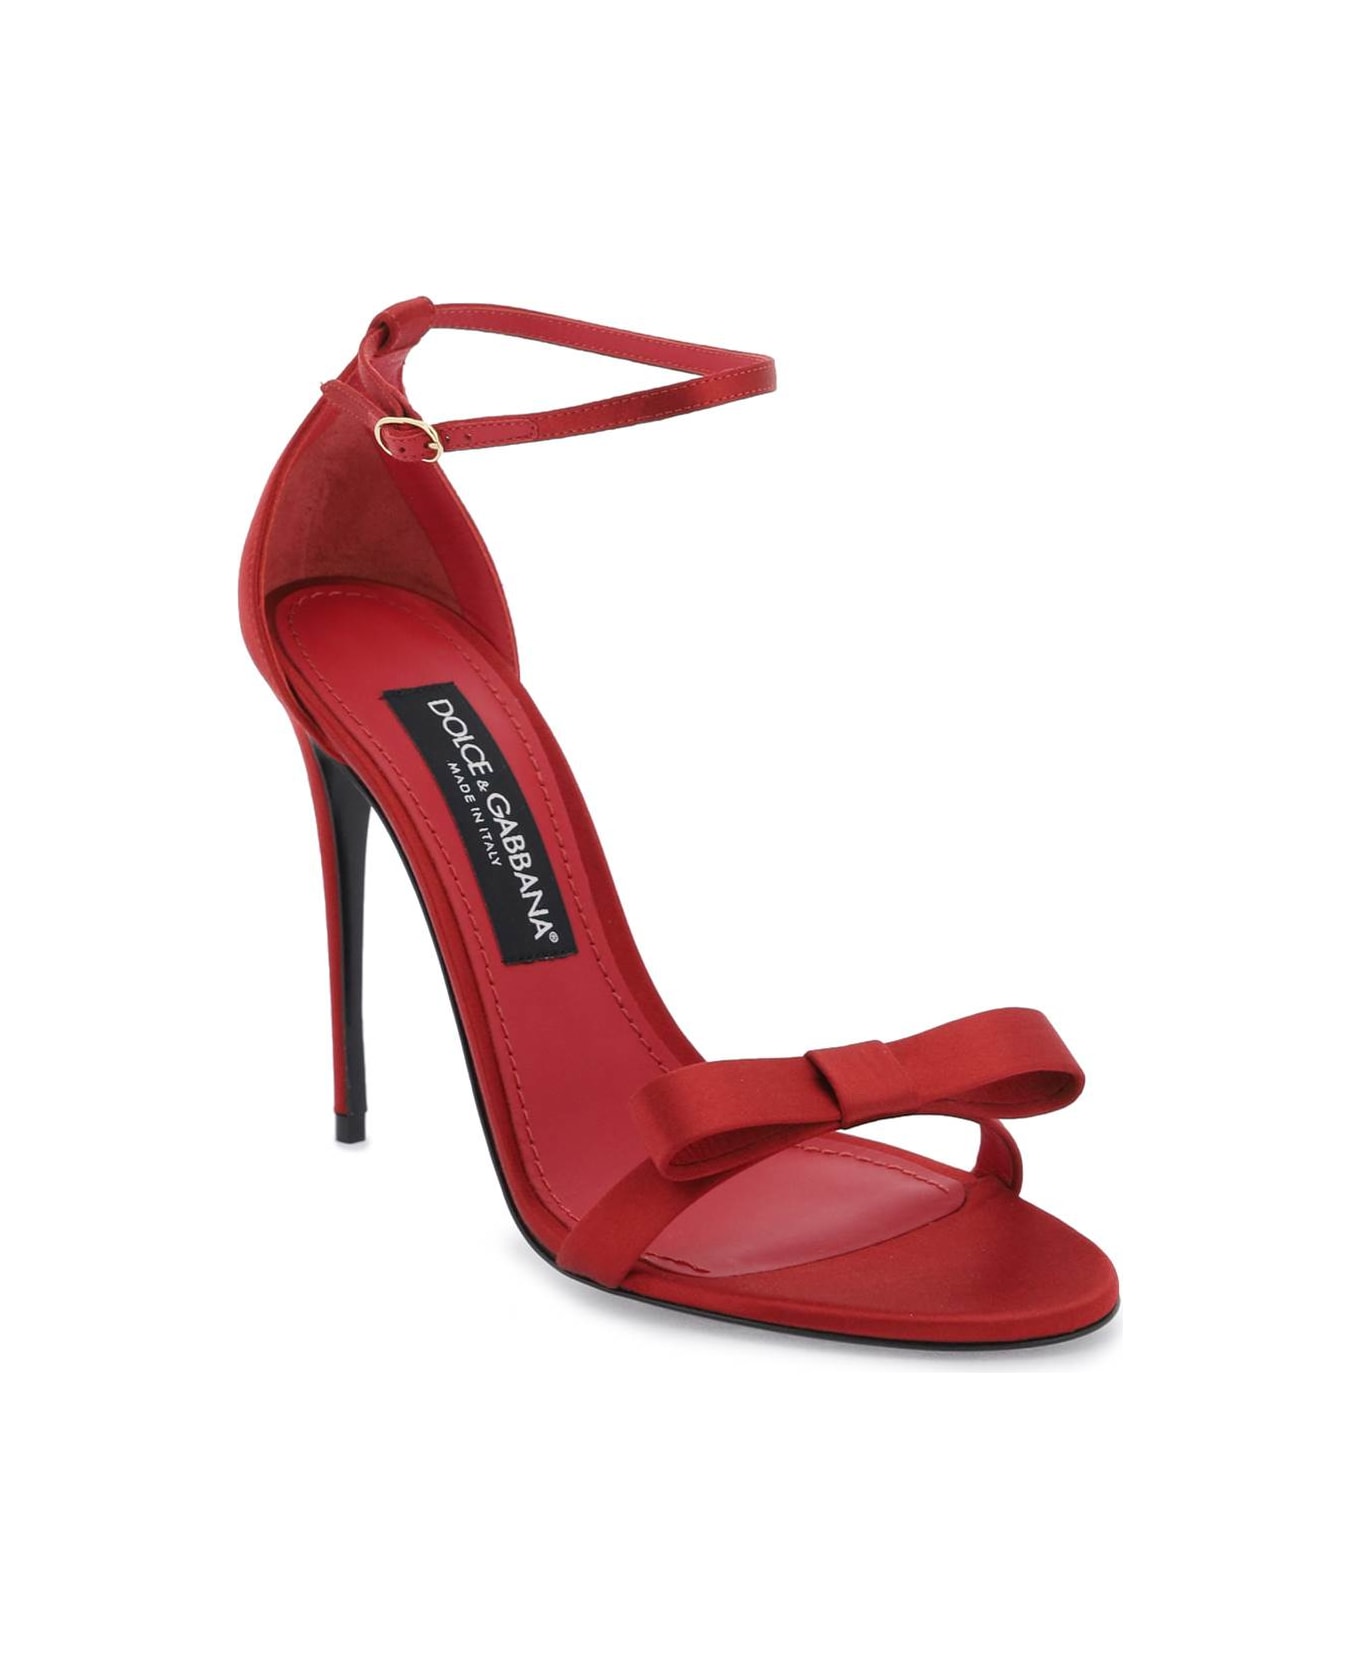 Dolce & Gabbana Satin Sandals - ROSSO SCURO 1 (Red)